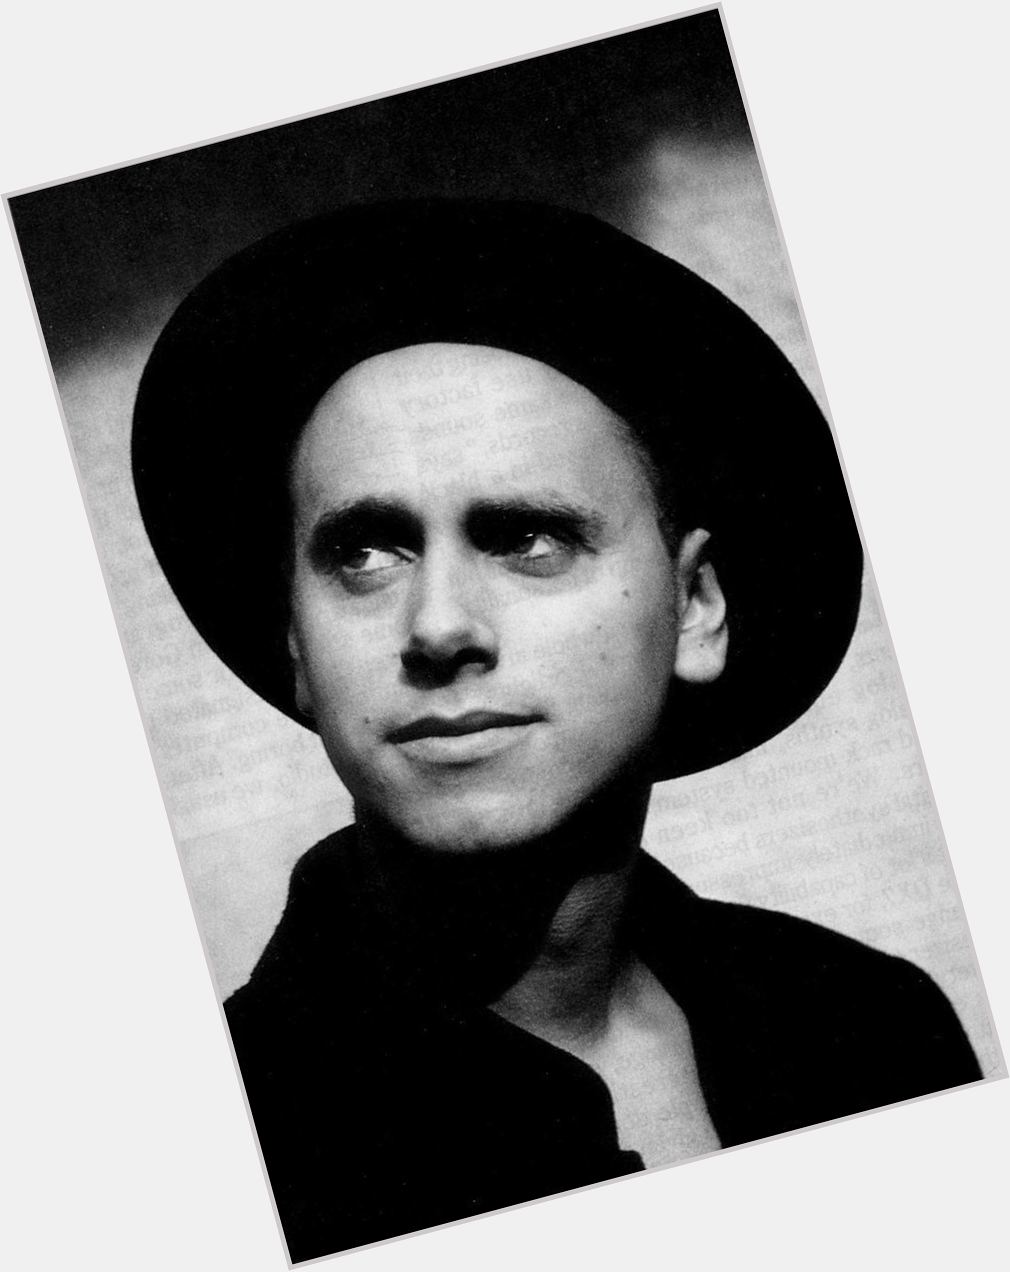 Happy Birthday to Martin Gore, born this day in 1961! 